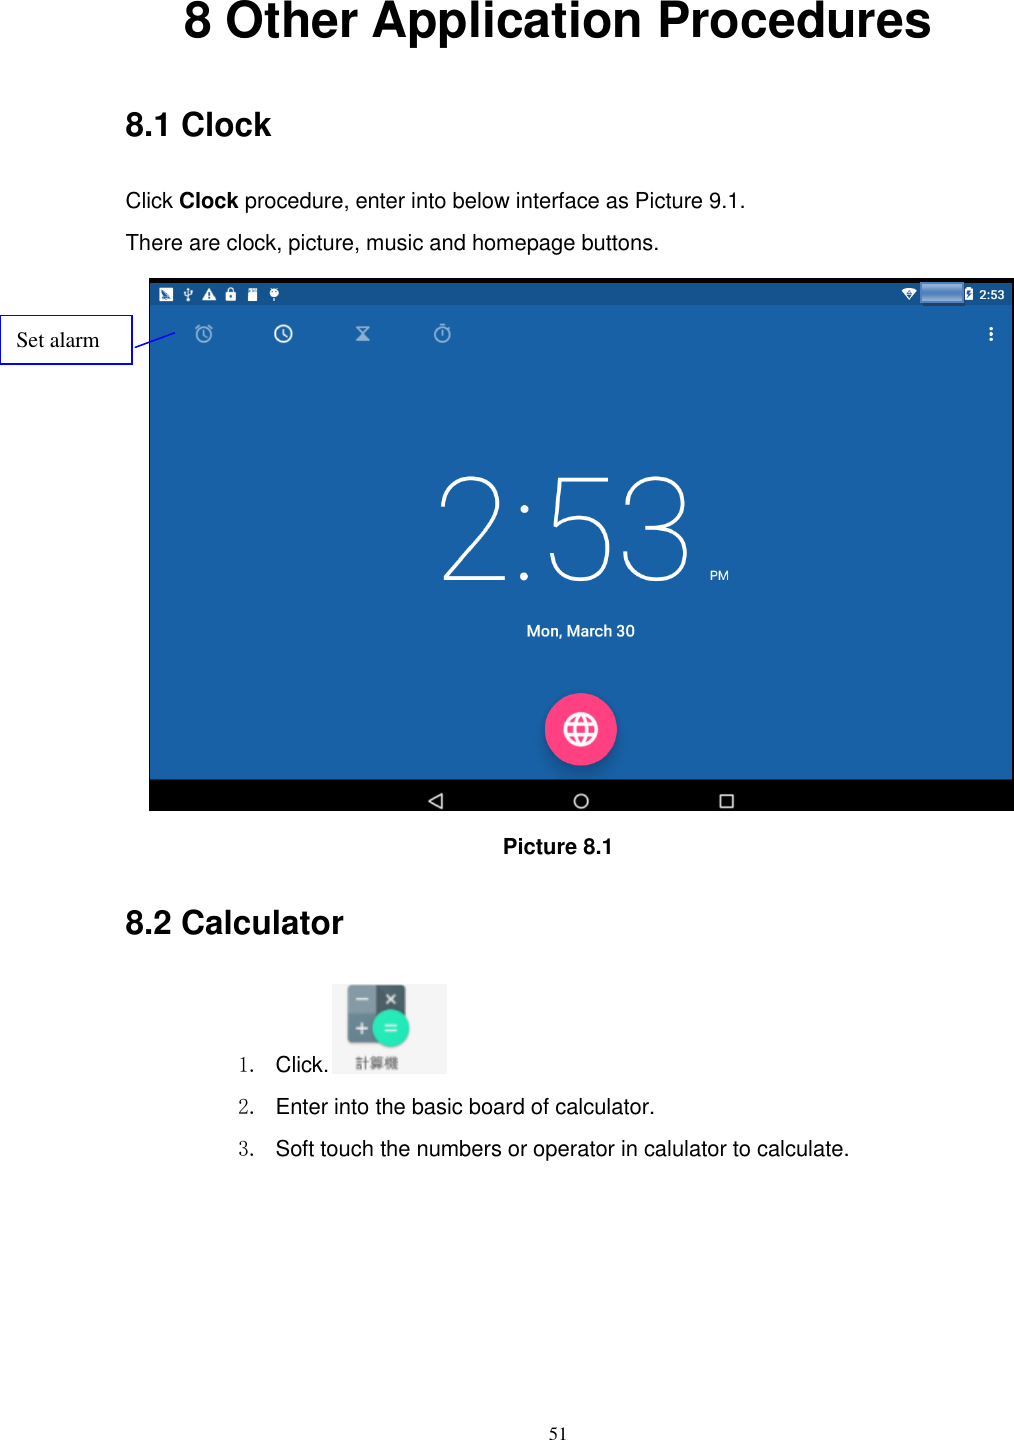      51 8 Other Application Procedures 8.1 Clock Click Clock procedure, enter into below interface as Picture 9.1. There are clock, picture, music and homepage buttons.  Picture 8.1 8.2 Calculator 1.  Click.  2.  Enter into the basic board of calculator. 3.  Soft touch the numbers or operator in calulator to calculate.   Set alarm 